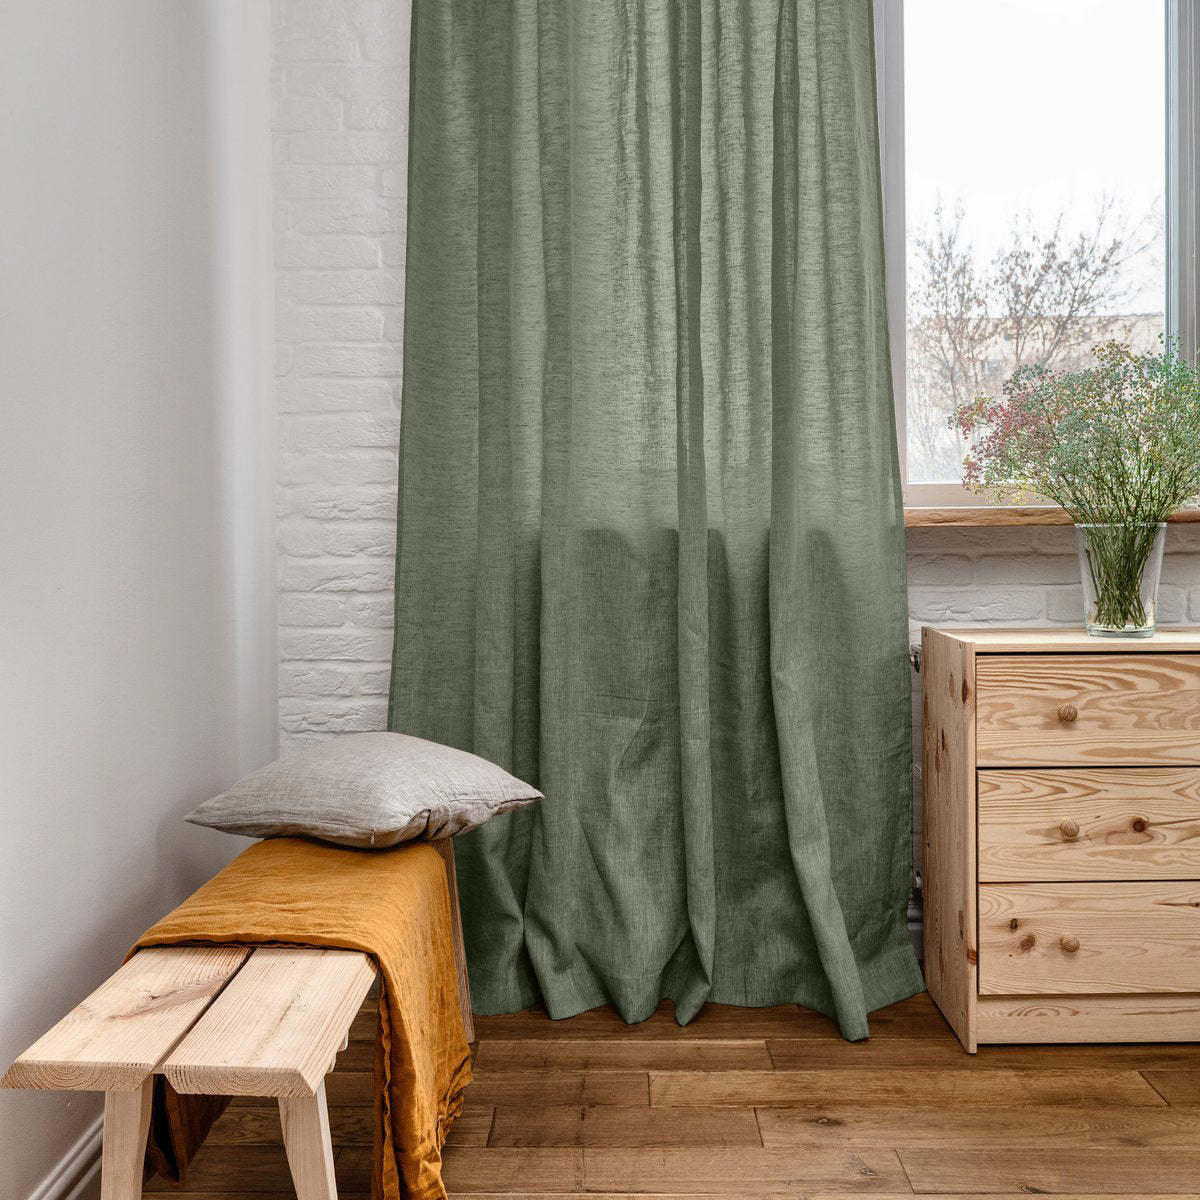 On Sale Set of 2 Linen Curtains with Pencil Pleat Heading -138X230 cm -  in White or Asparagus Green Color